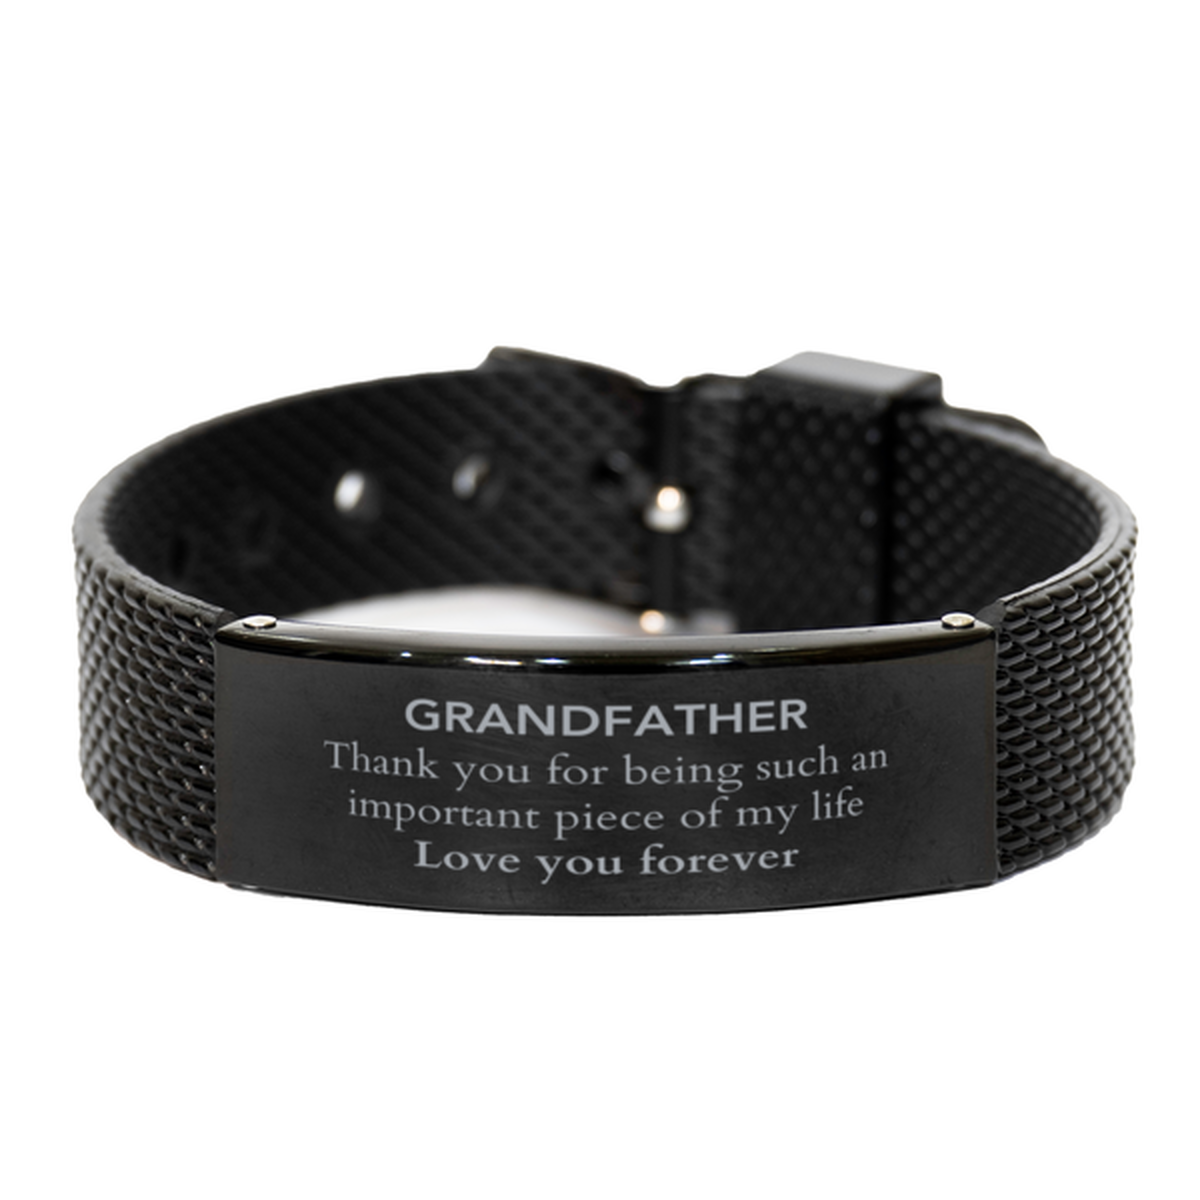 Appropriate Grandfather Black Shark Mesh Bracelet Epic Birthday Gifts for Grandfather Thank you for being such an important piece of my life Grandfather Christmas Mothers Fathers Day